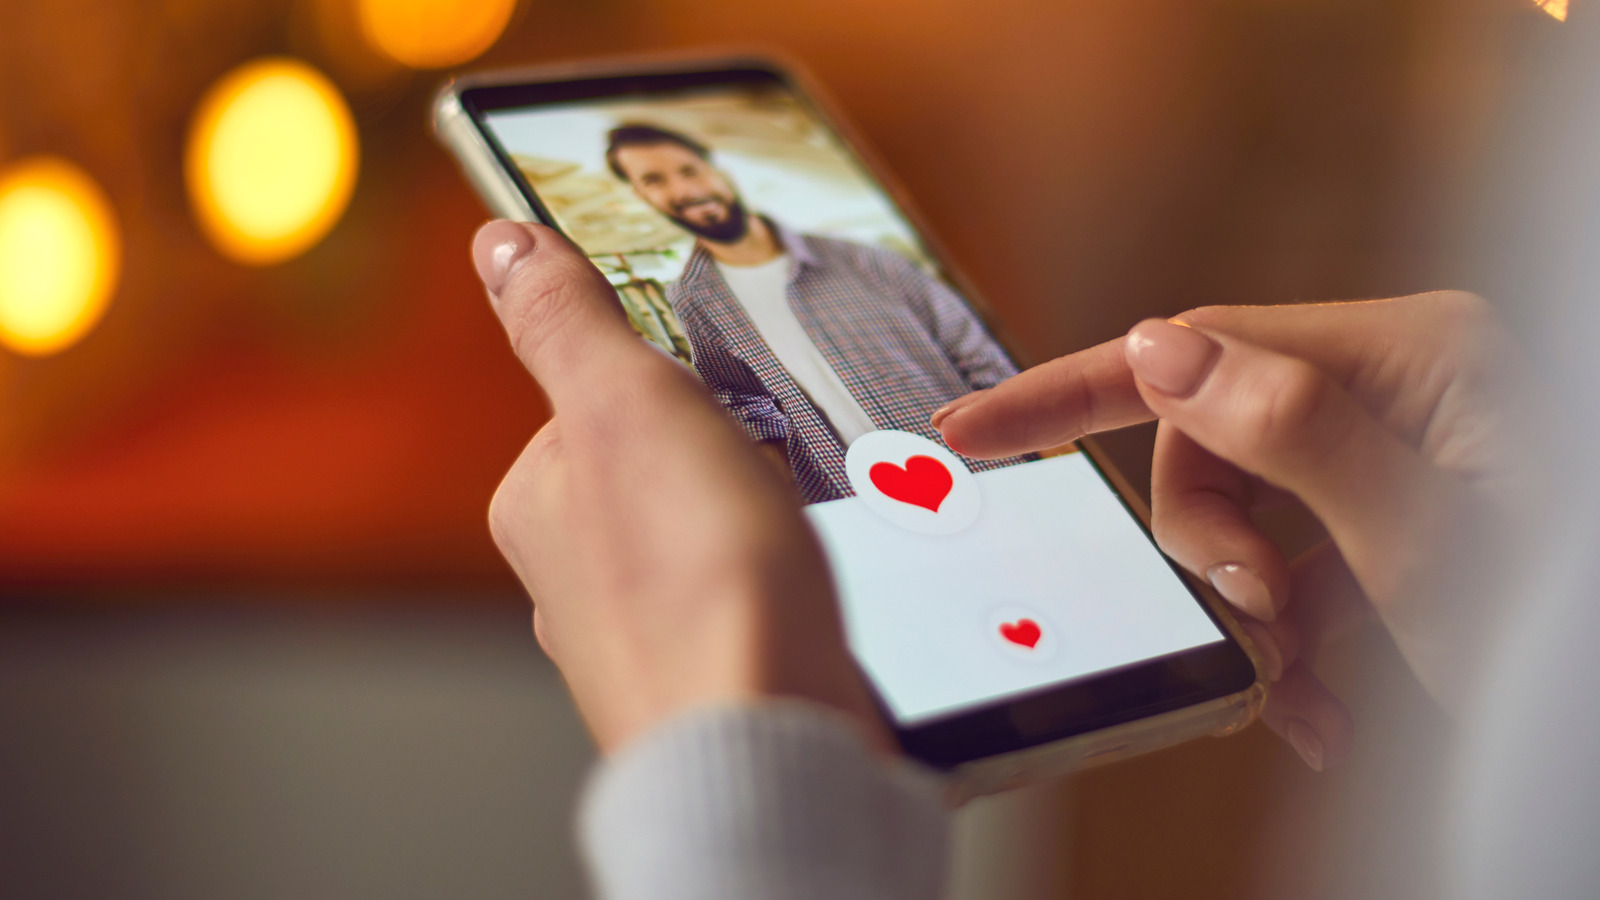 These 10 Hacks Will Make Your dating onlineLike A Pro